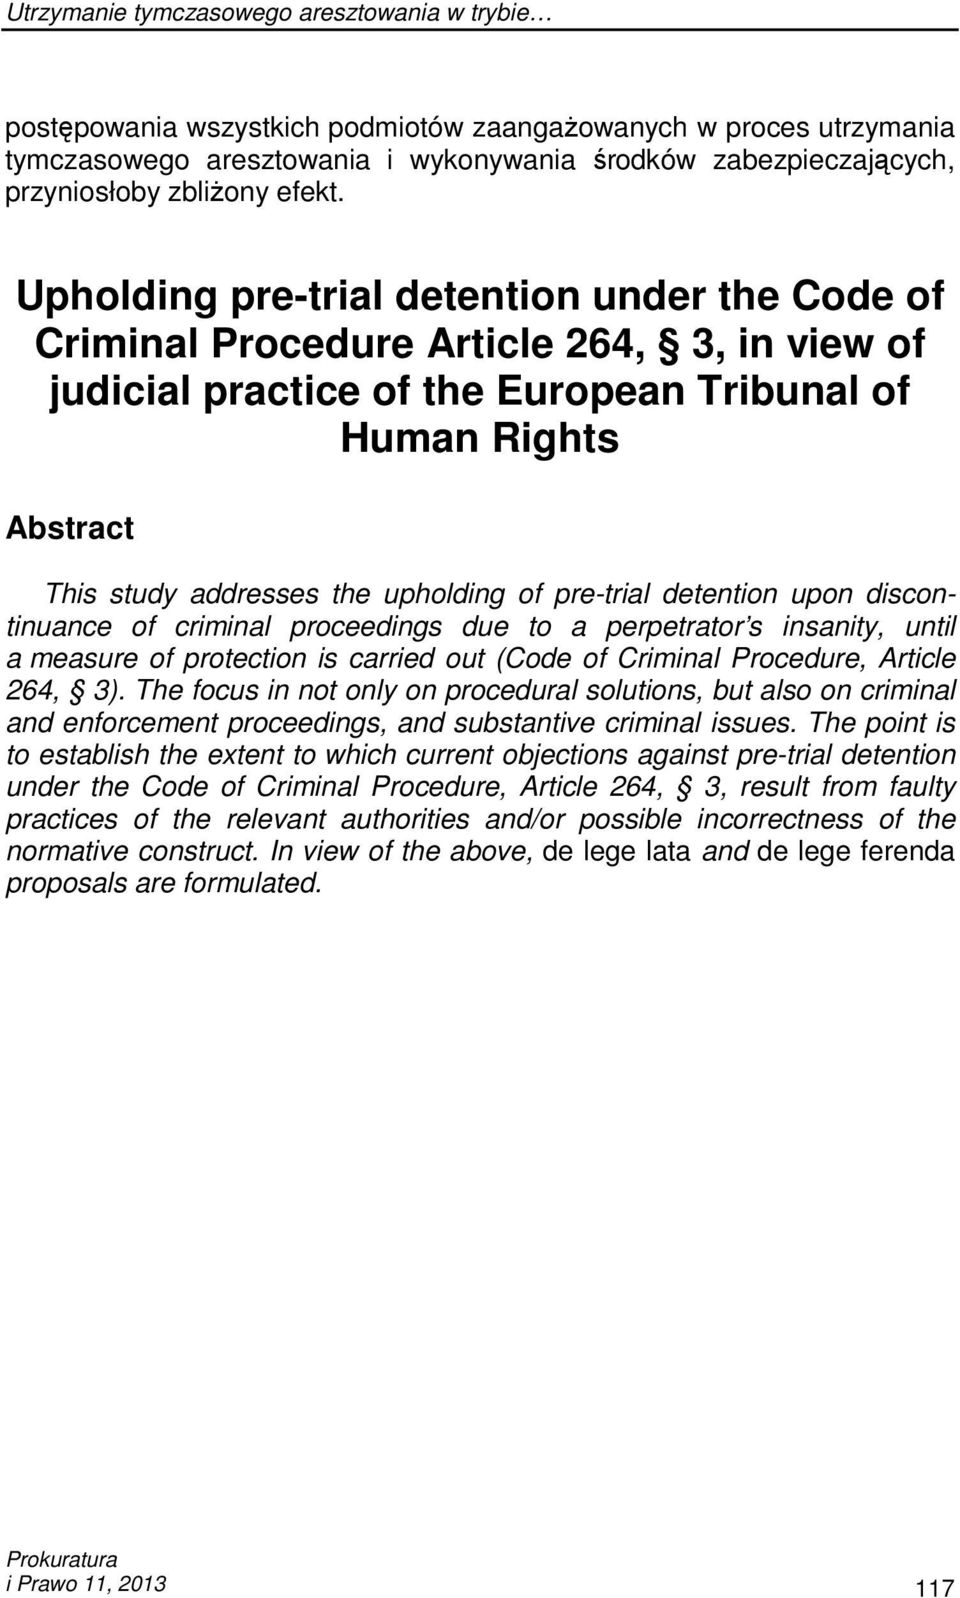 Upholding pre-trial detention under the Code of Criminal Procedure Article 264, 3, in view of judicial practice of the European Tribunal of Human Rights Abstract This study addresses the upholding of